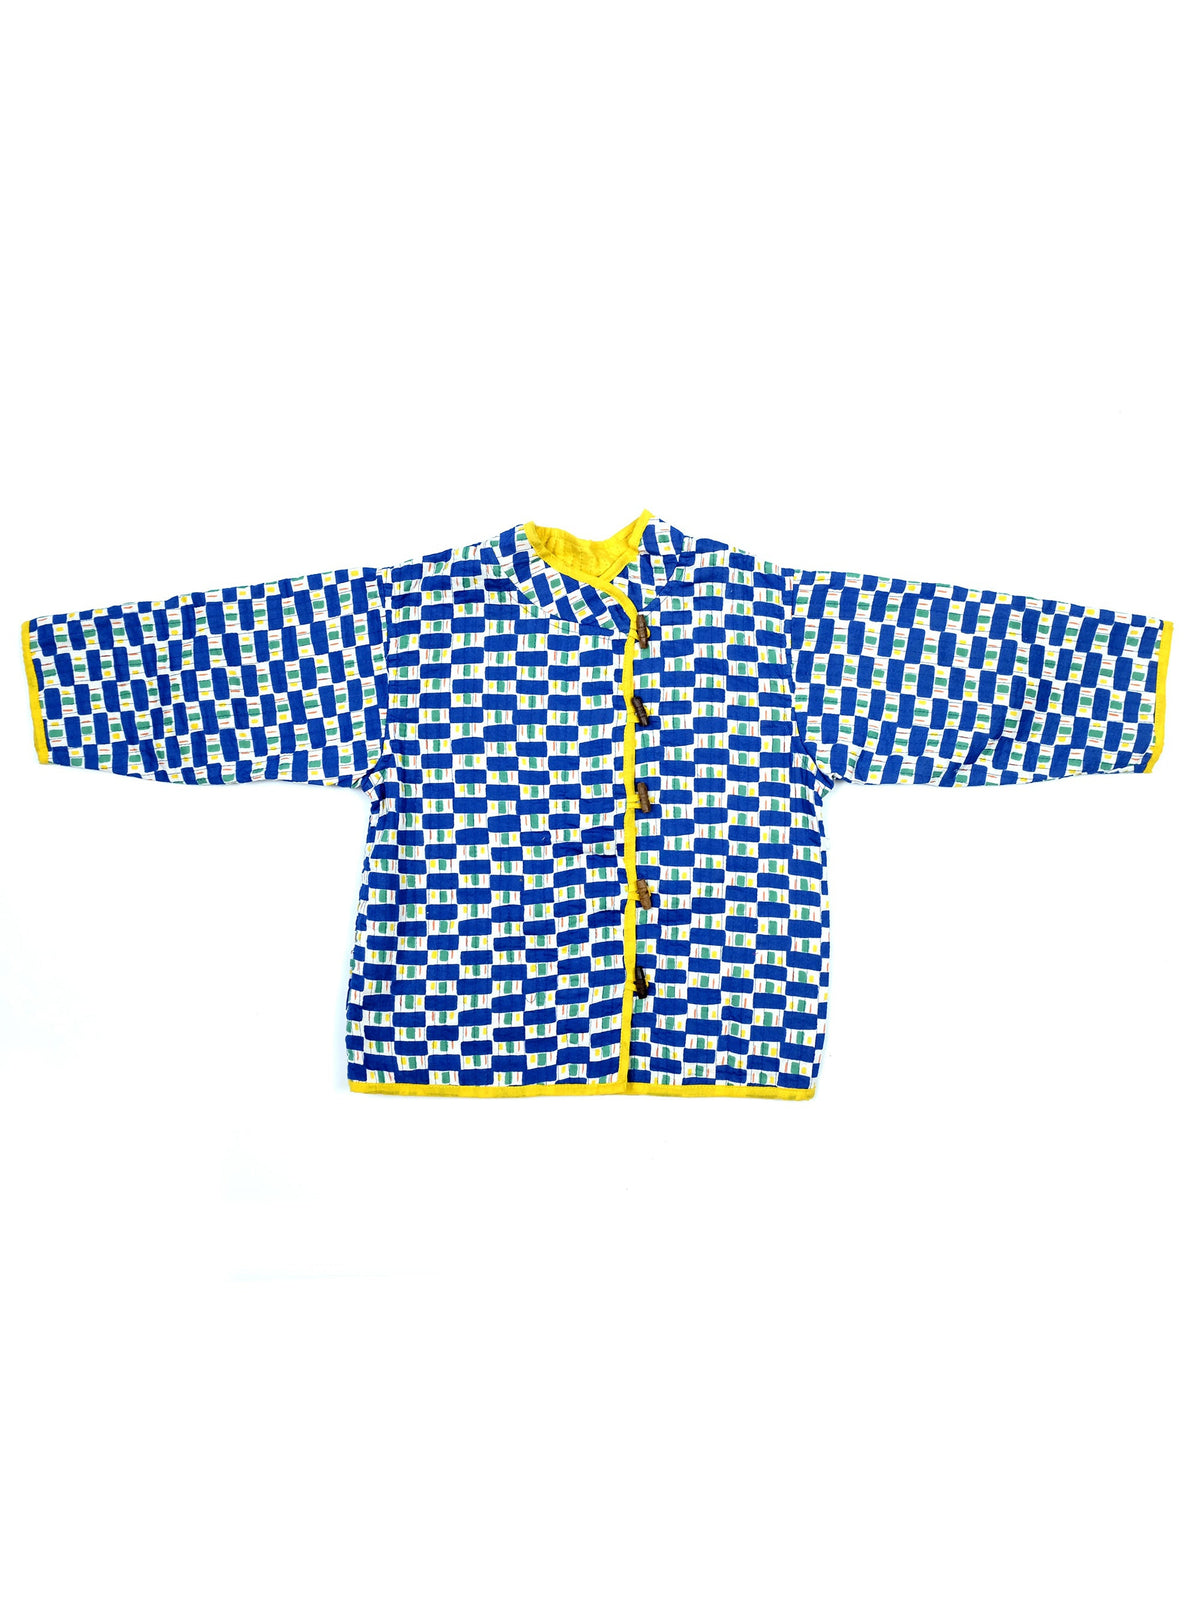 Kids organic cotton quilted Jacket in Blue Bridge-Humphries and Begg